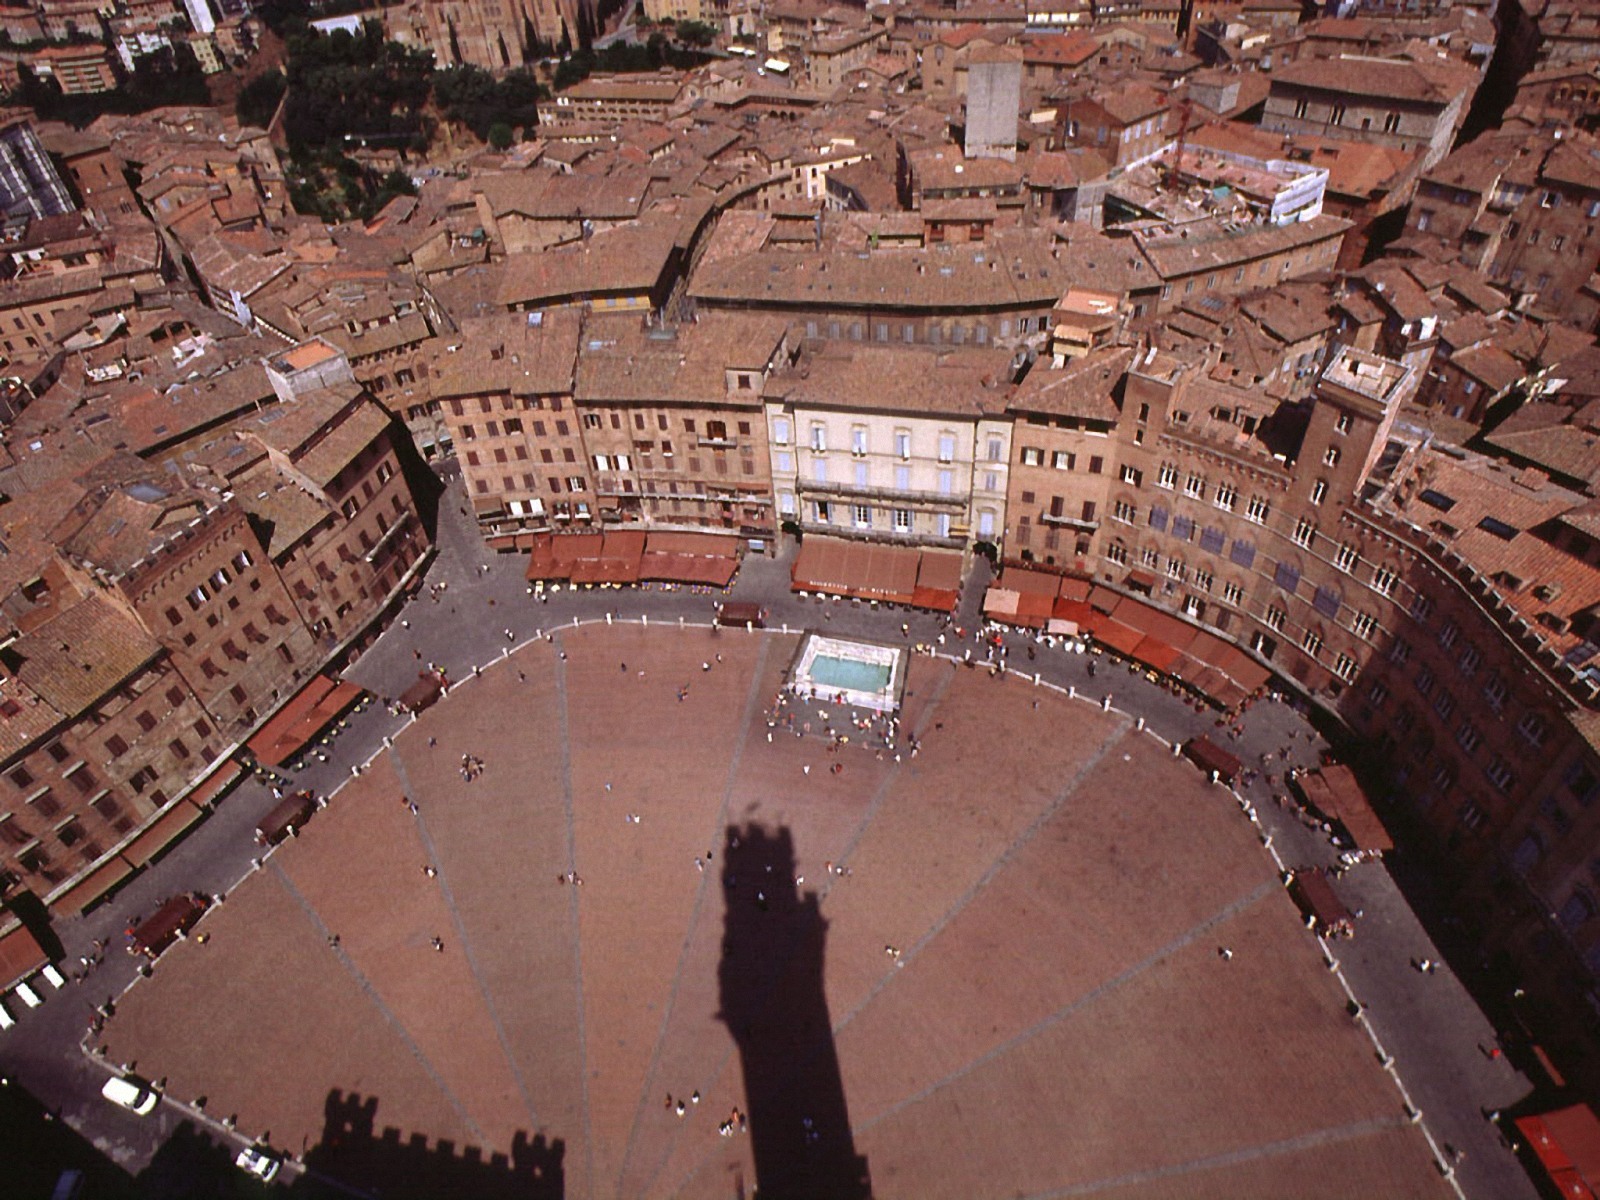 Siena Image Wallpaper Pictures